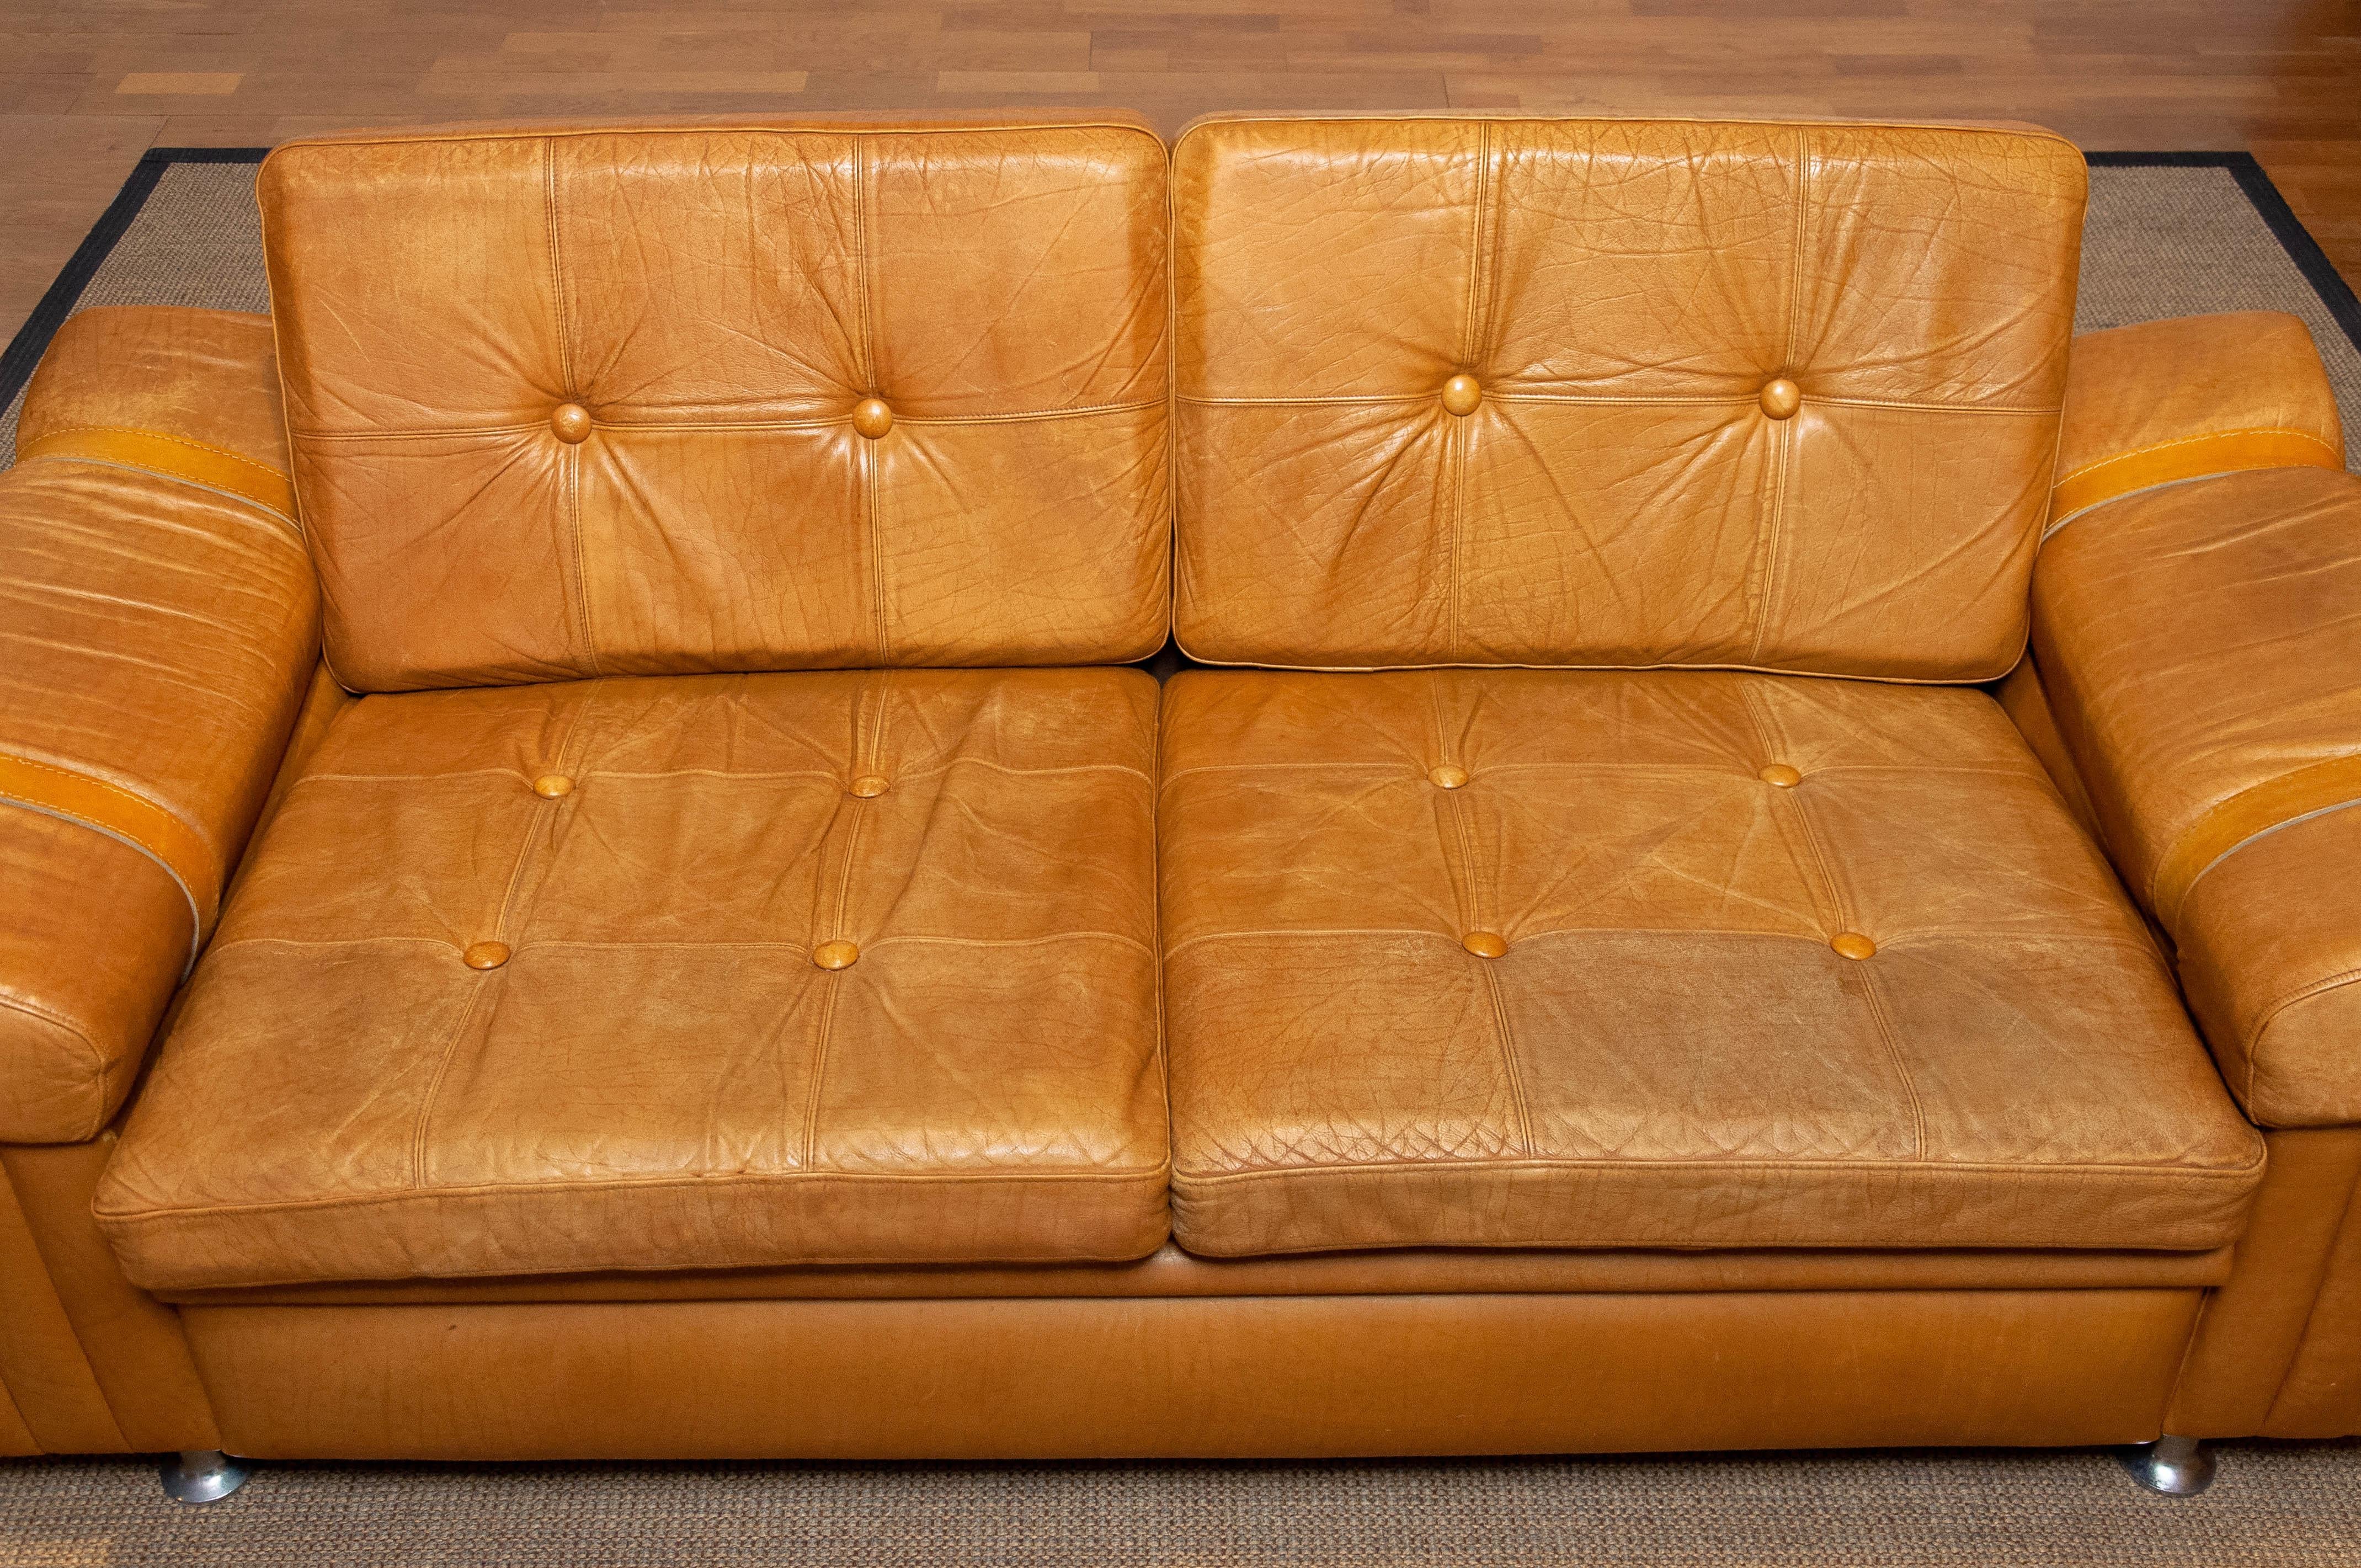 Beautiful Brutalist two-seater sofa in camel colored leather. This Scandinavian sofa makes the impression, for used materials and design and quality, that it co a Swedish product from the Norell AB Company but we can't find any related history.
We